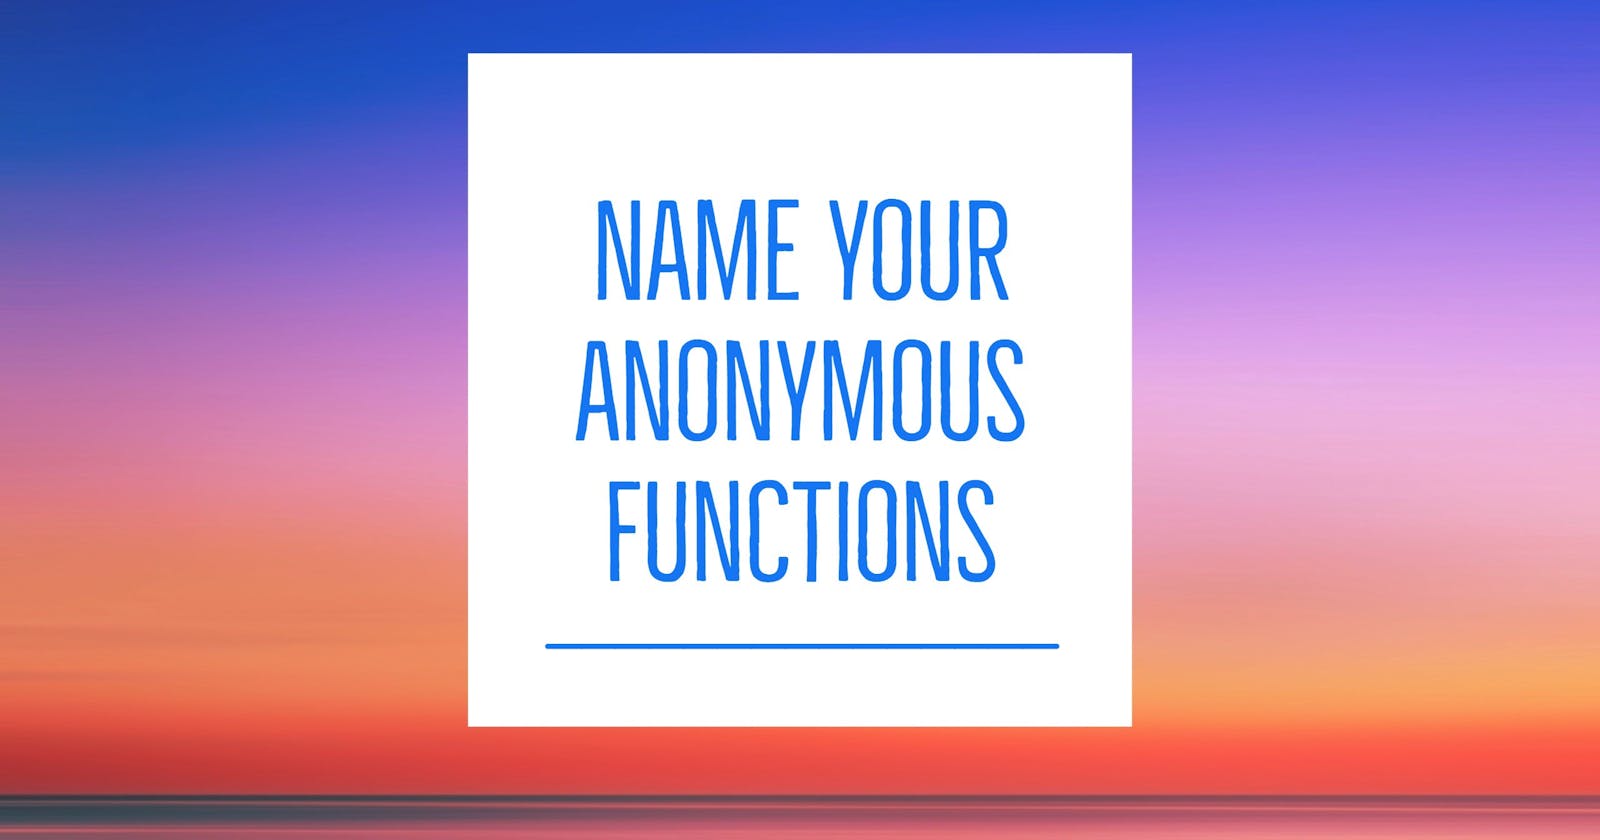 I started naming all my anonymous functions (and you should, too)